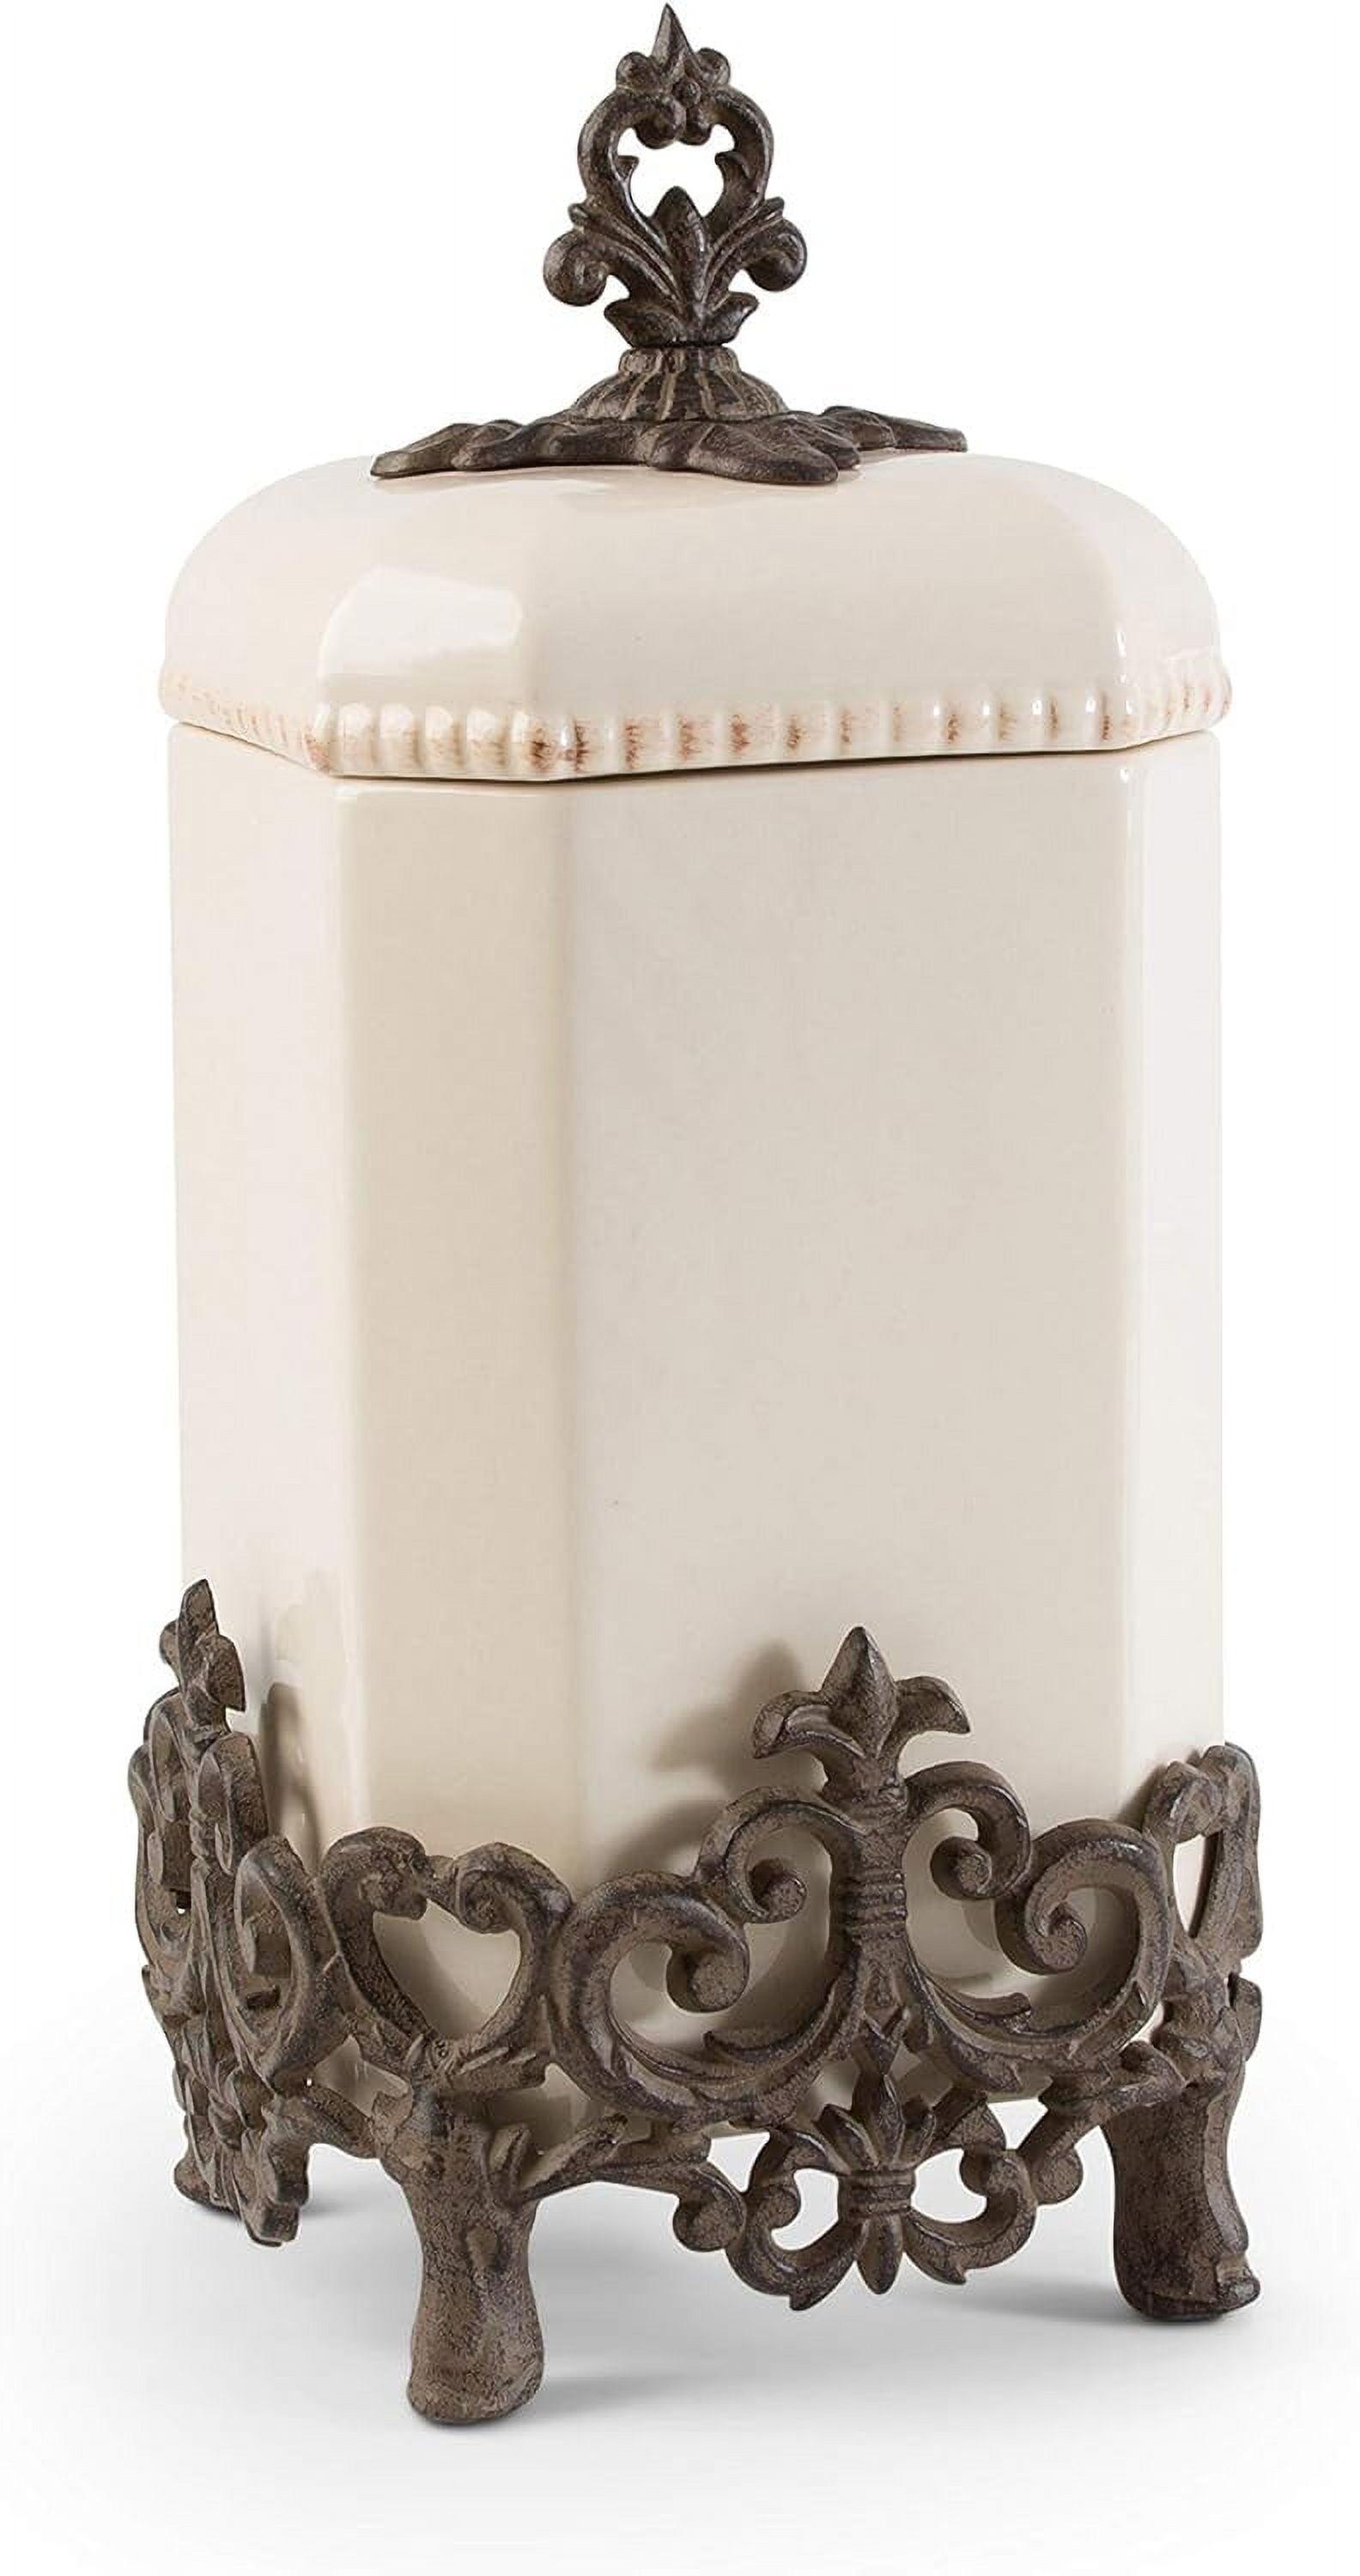 Provencial Cream 16" Ceramic Canister with Brown Metal Base